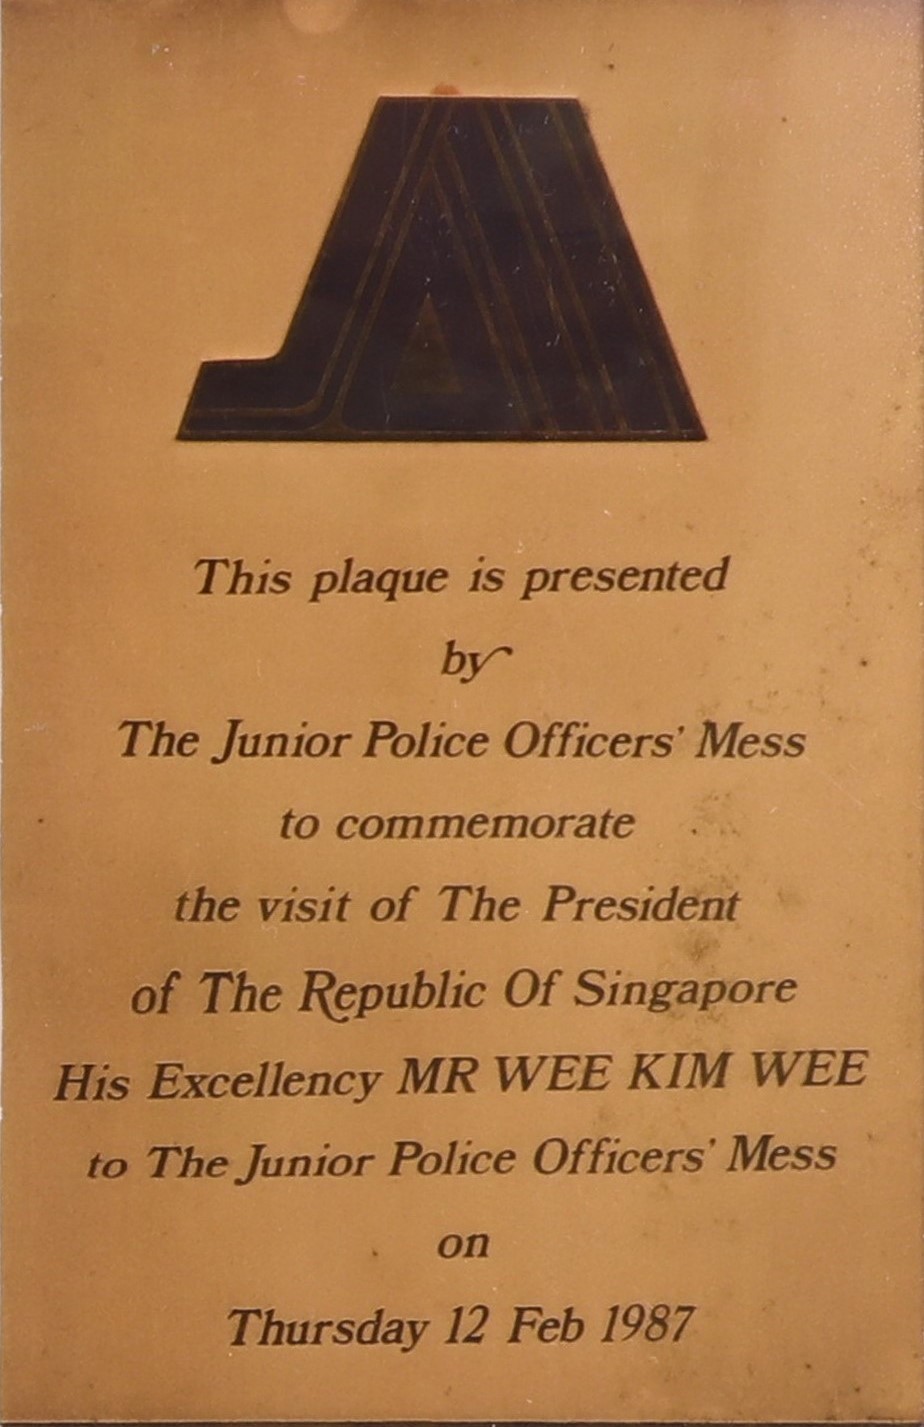 Plaque from The Junior Police Officers' Mess